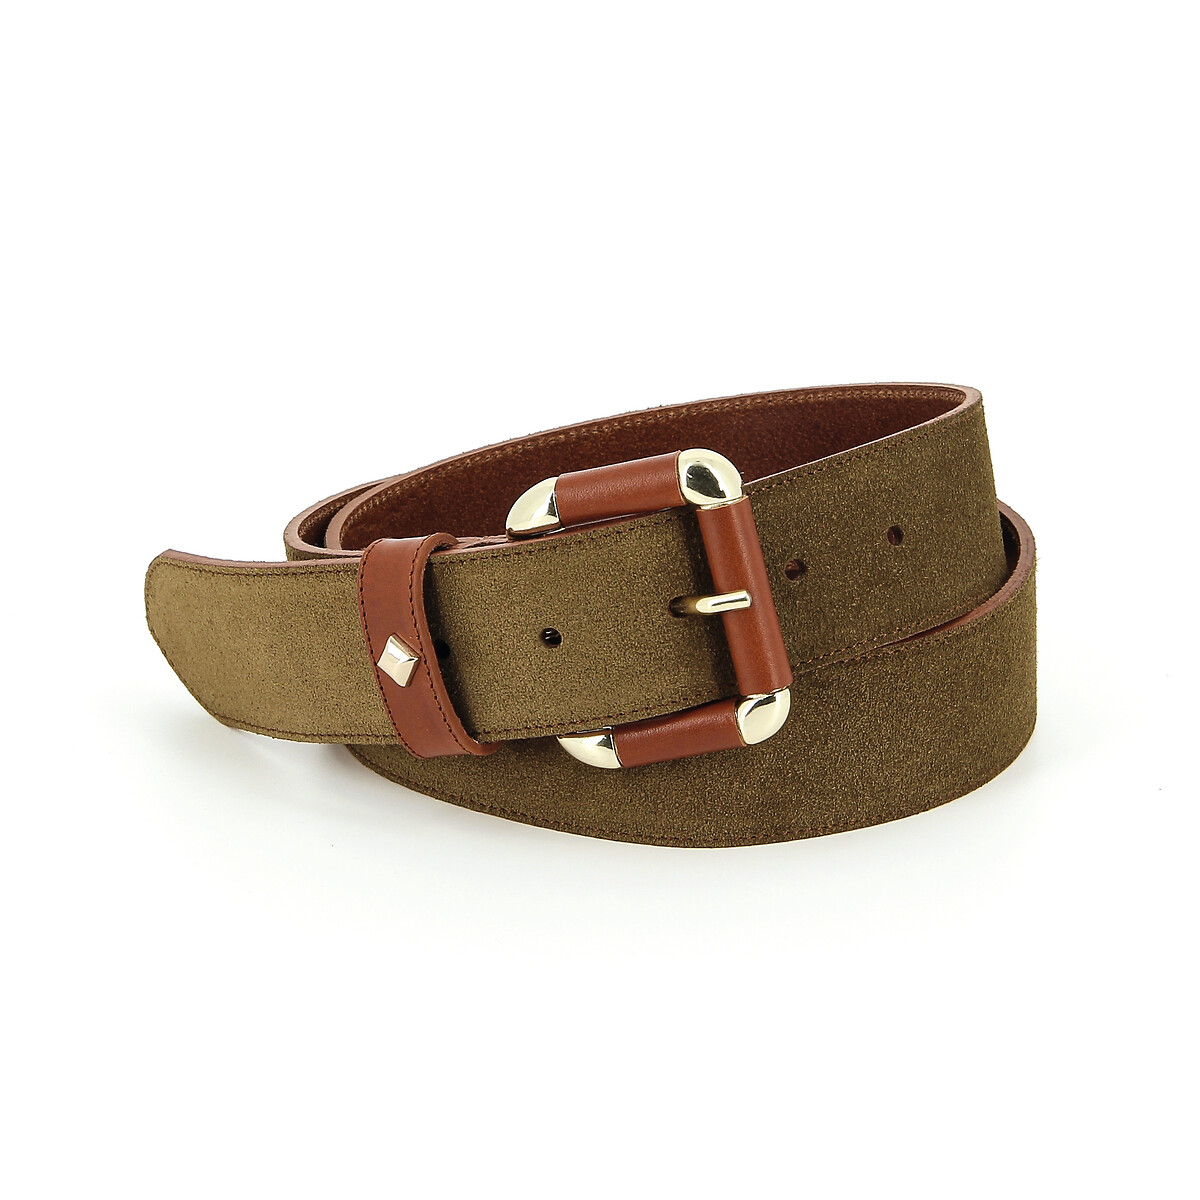 Two-Tone Belt in Suede/Leather